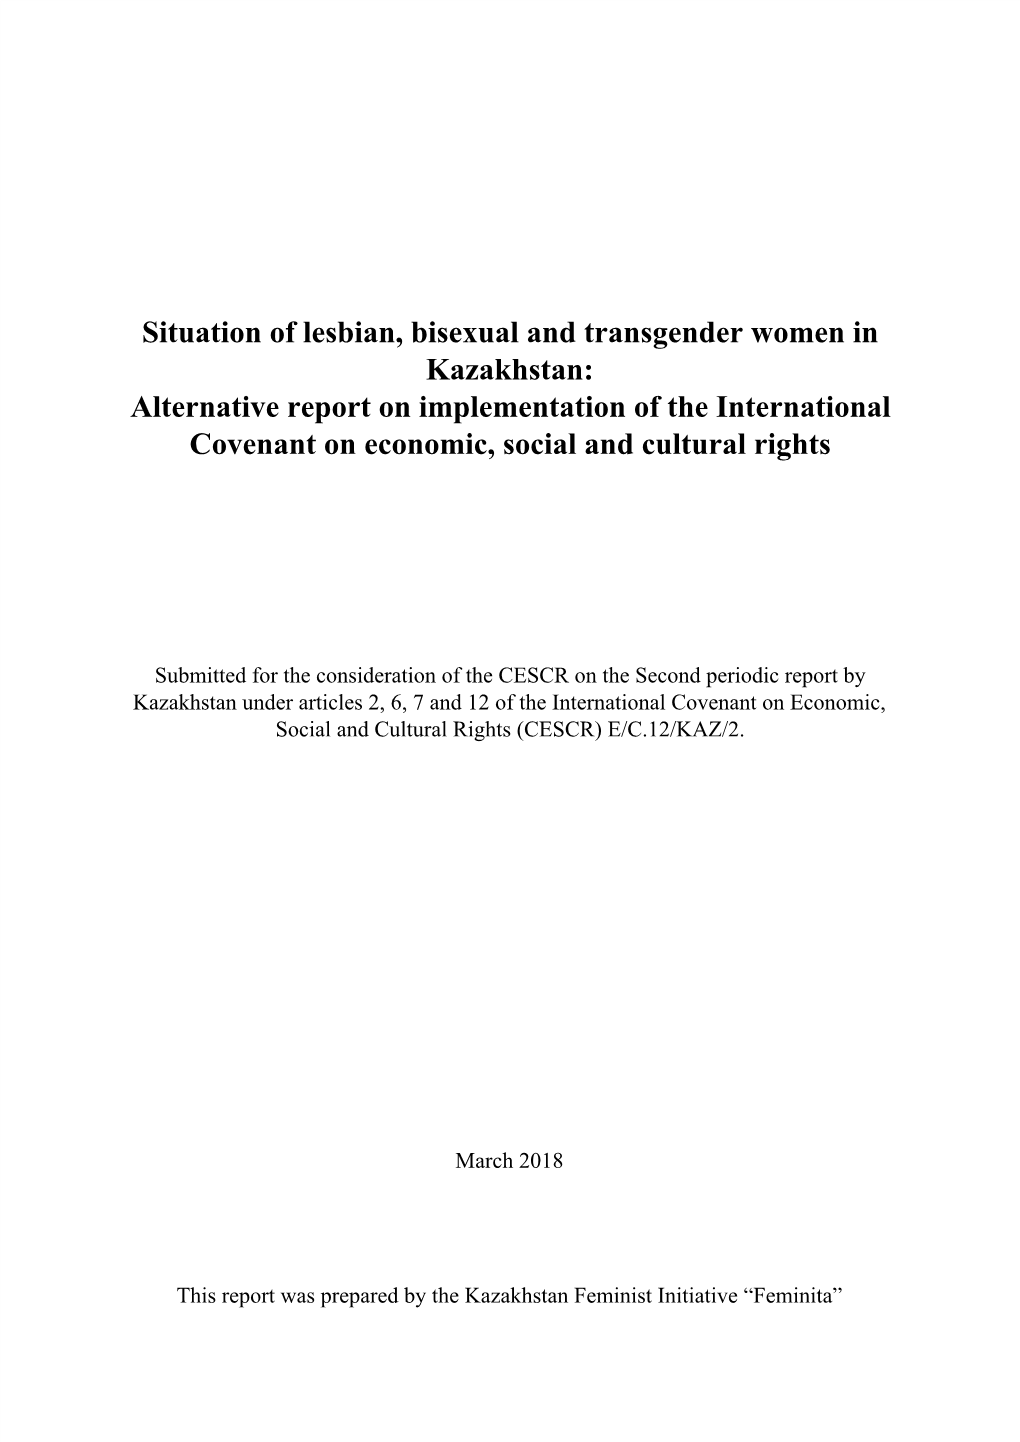 Situation of Lesbian, Bisexual and Transgender Women in Kazakhstan